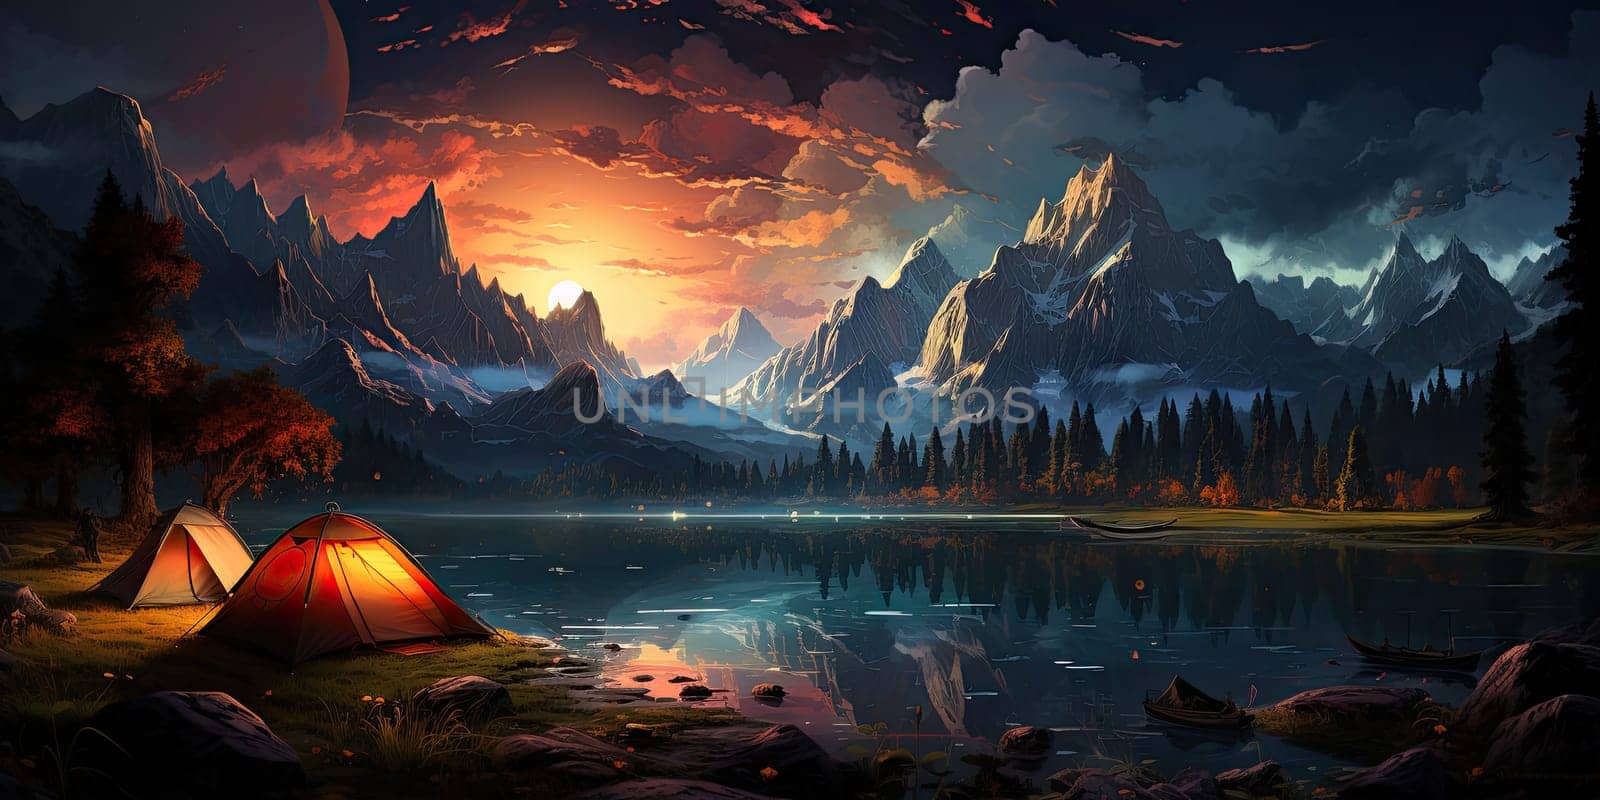 Adventures Camping tourism and tent and car next to the lake. Landscape outdoor in morning.